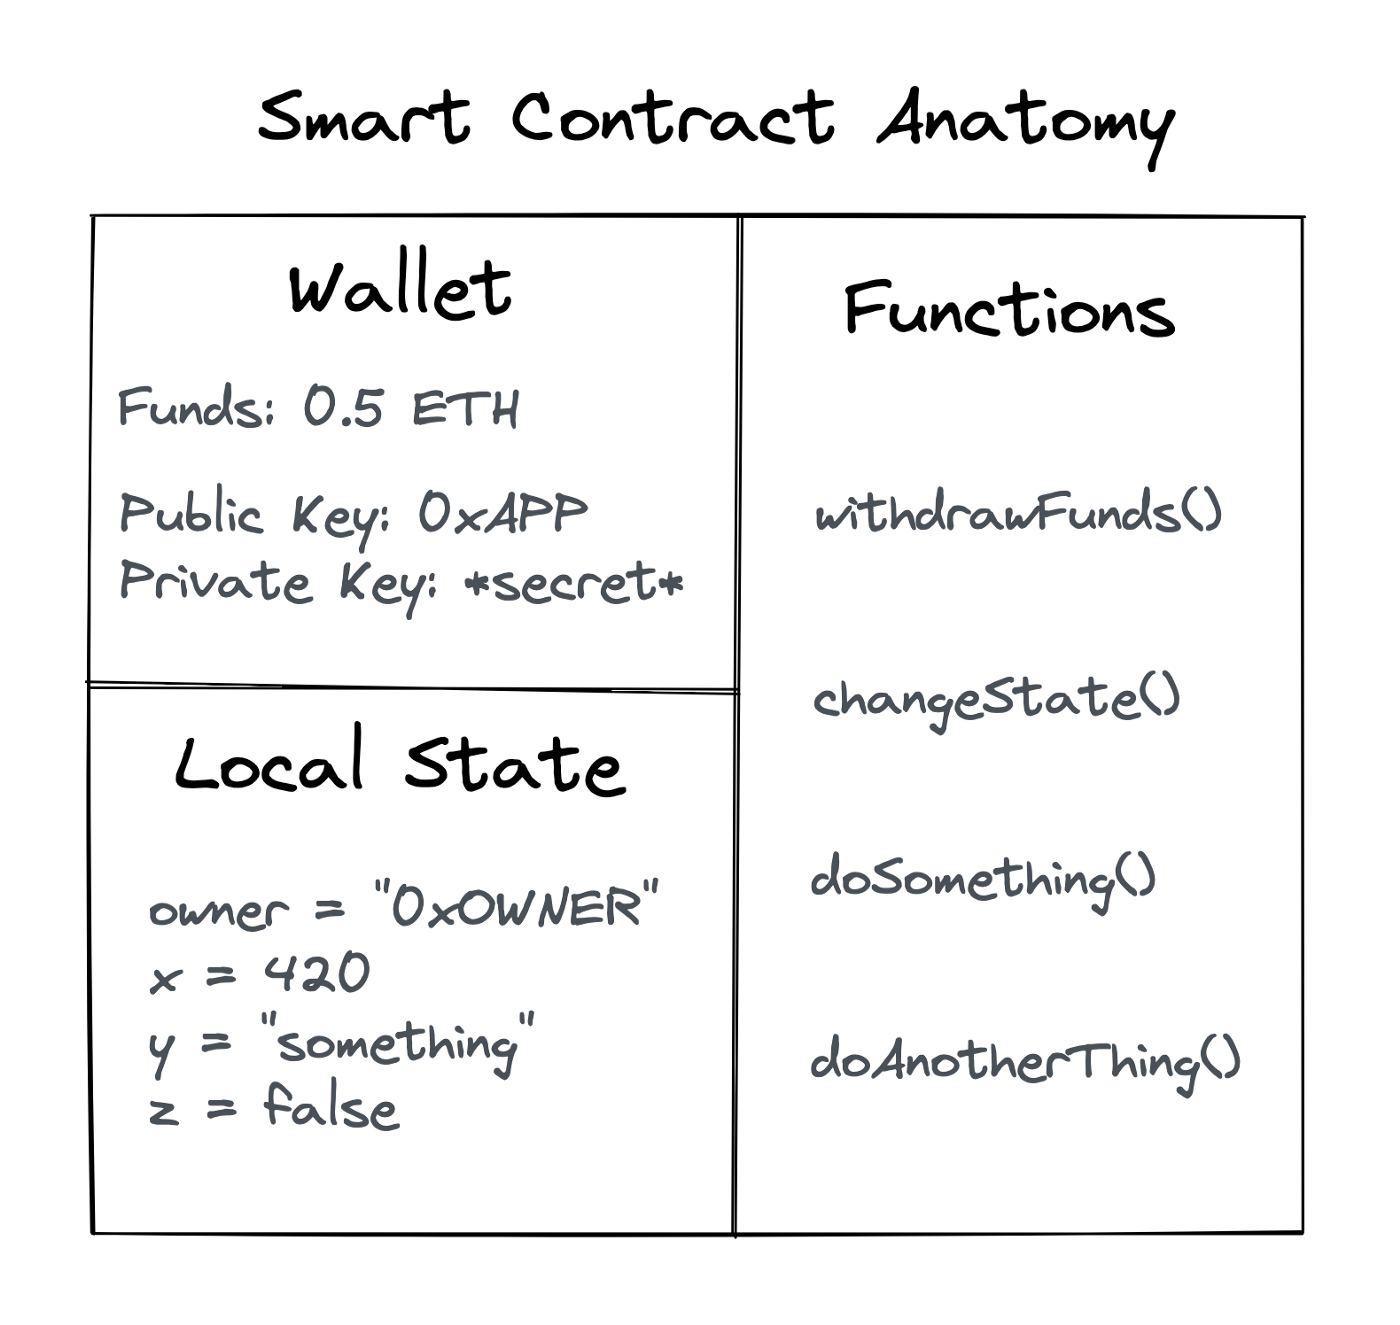 A simple overview of a smart contract